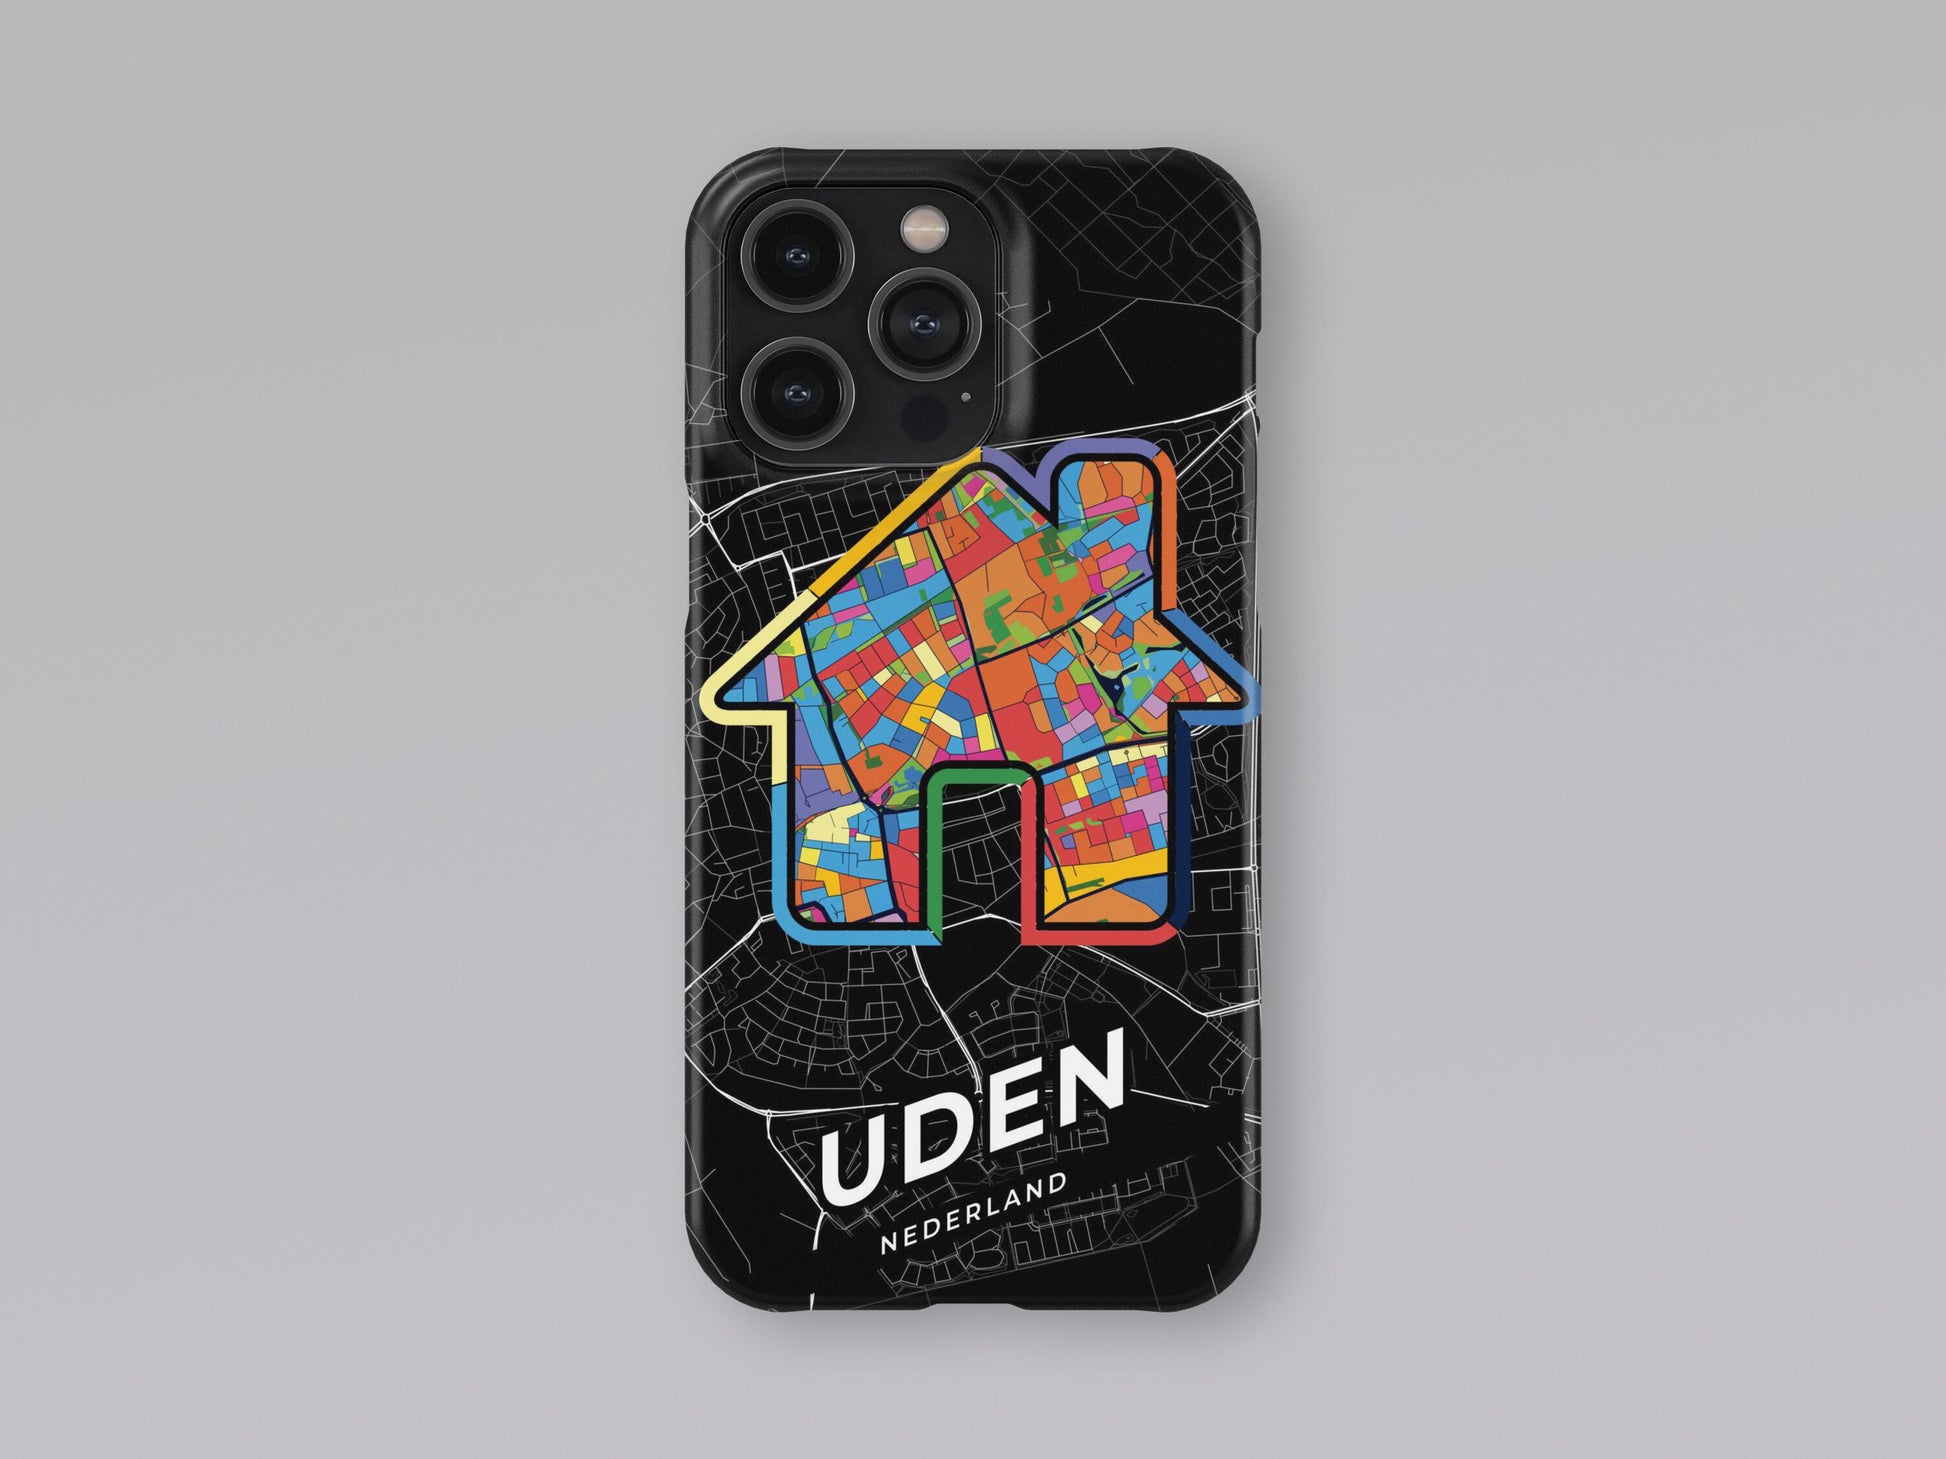 Uden Netherlands slim phone case with colorful icon 3